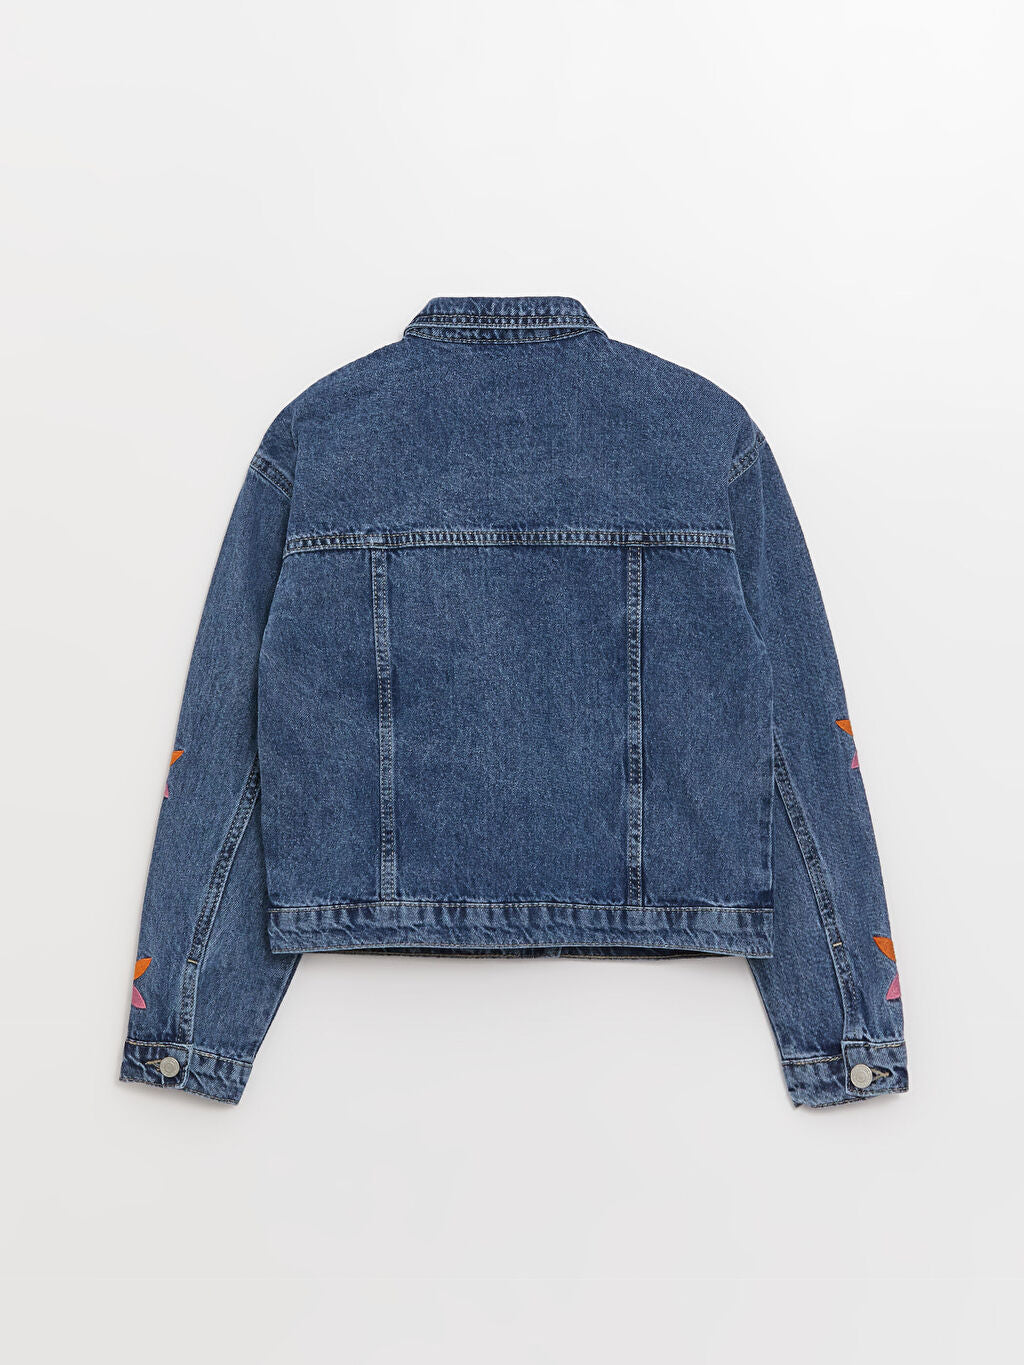 Shirt Collar Embroidered Girl Jean Jacket